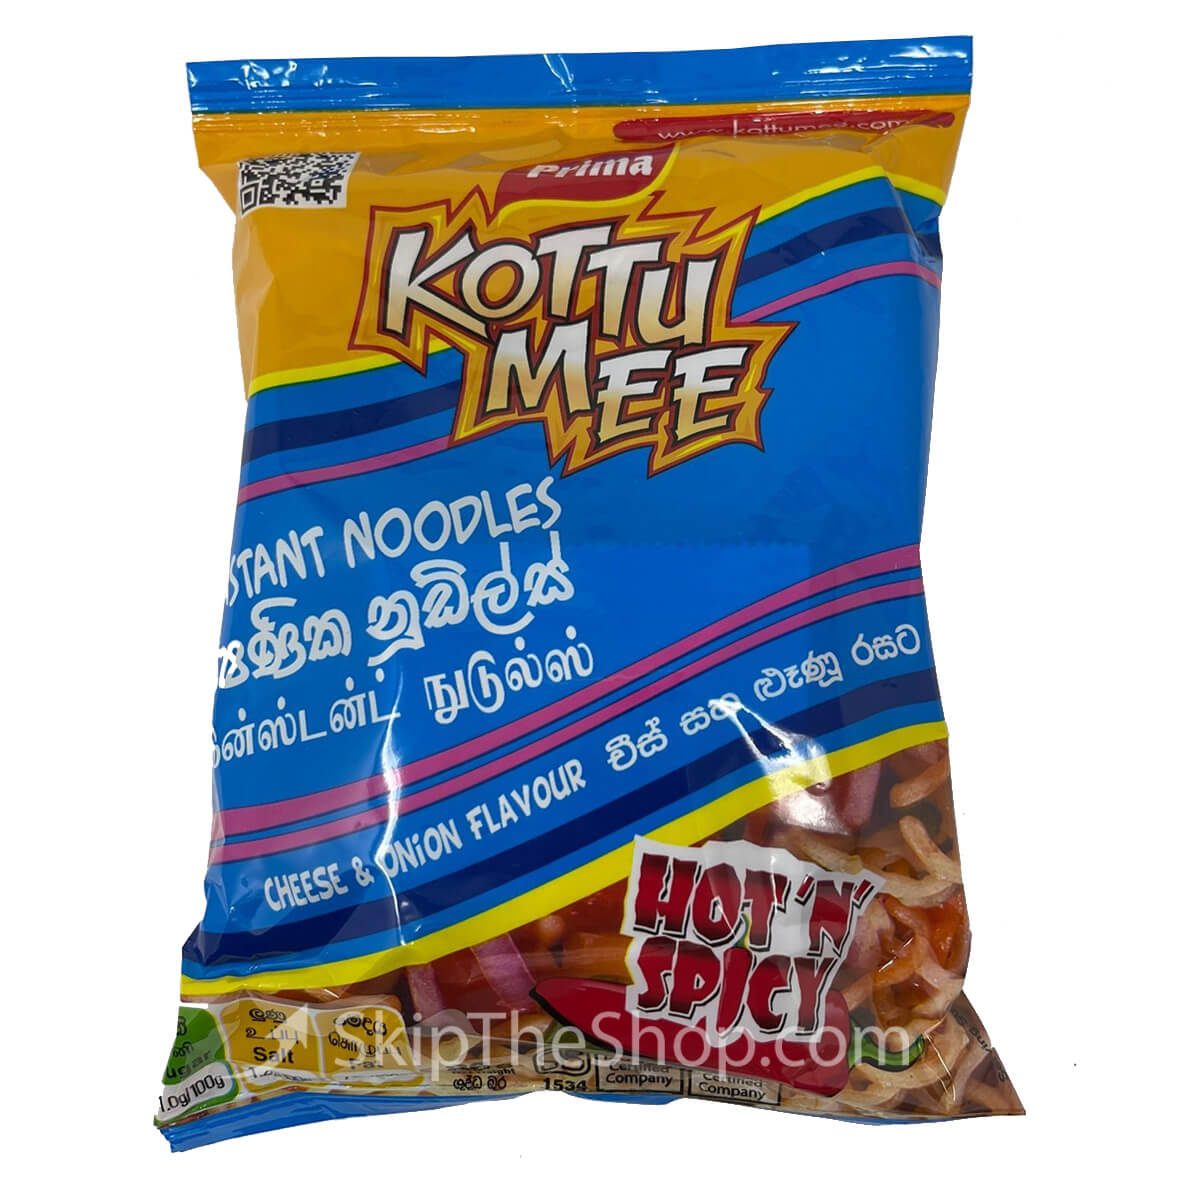 Prima Kottu Mee Cheese and Onion Flavour 78g